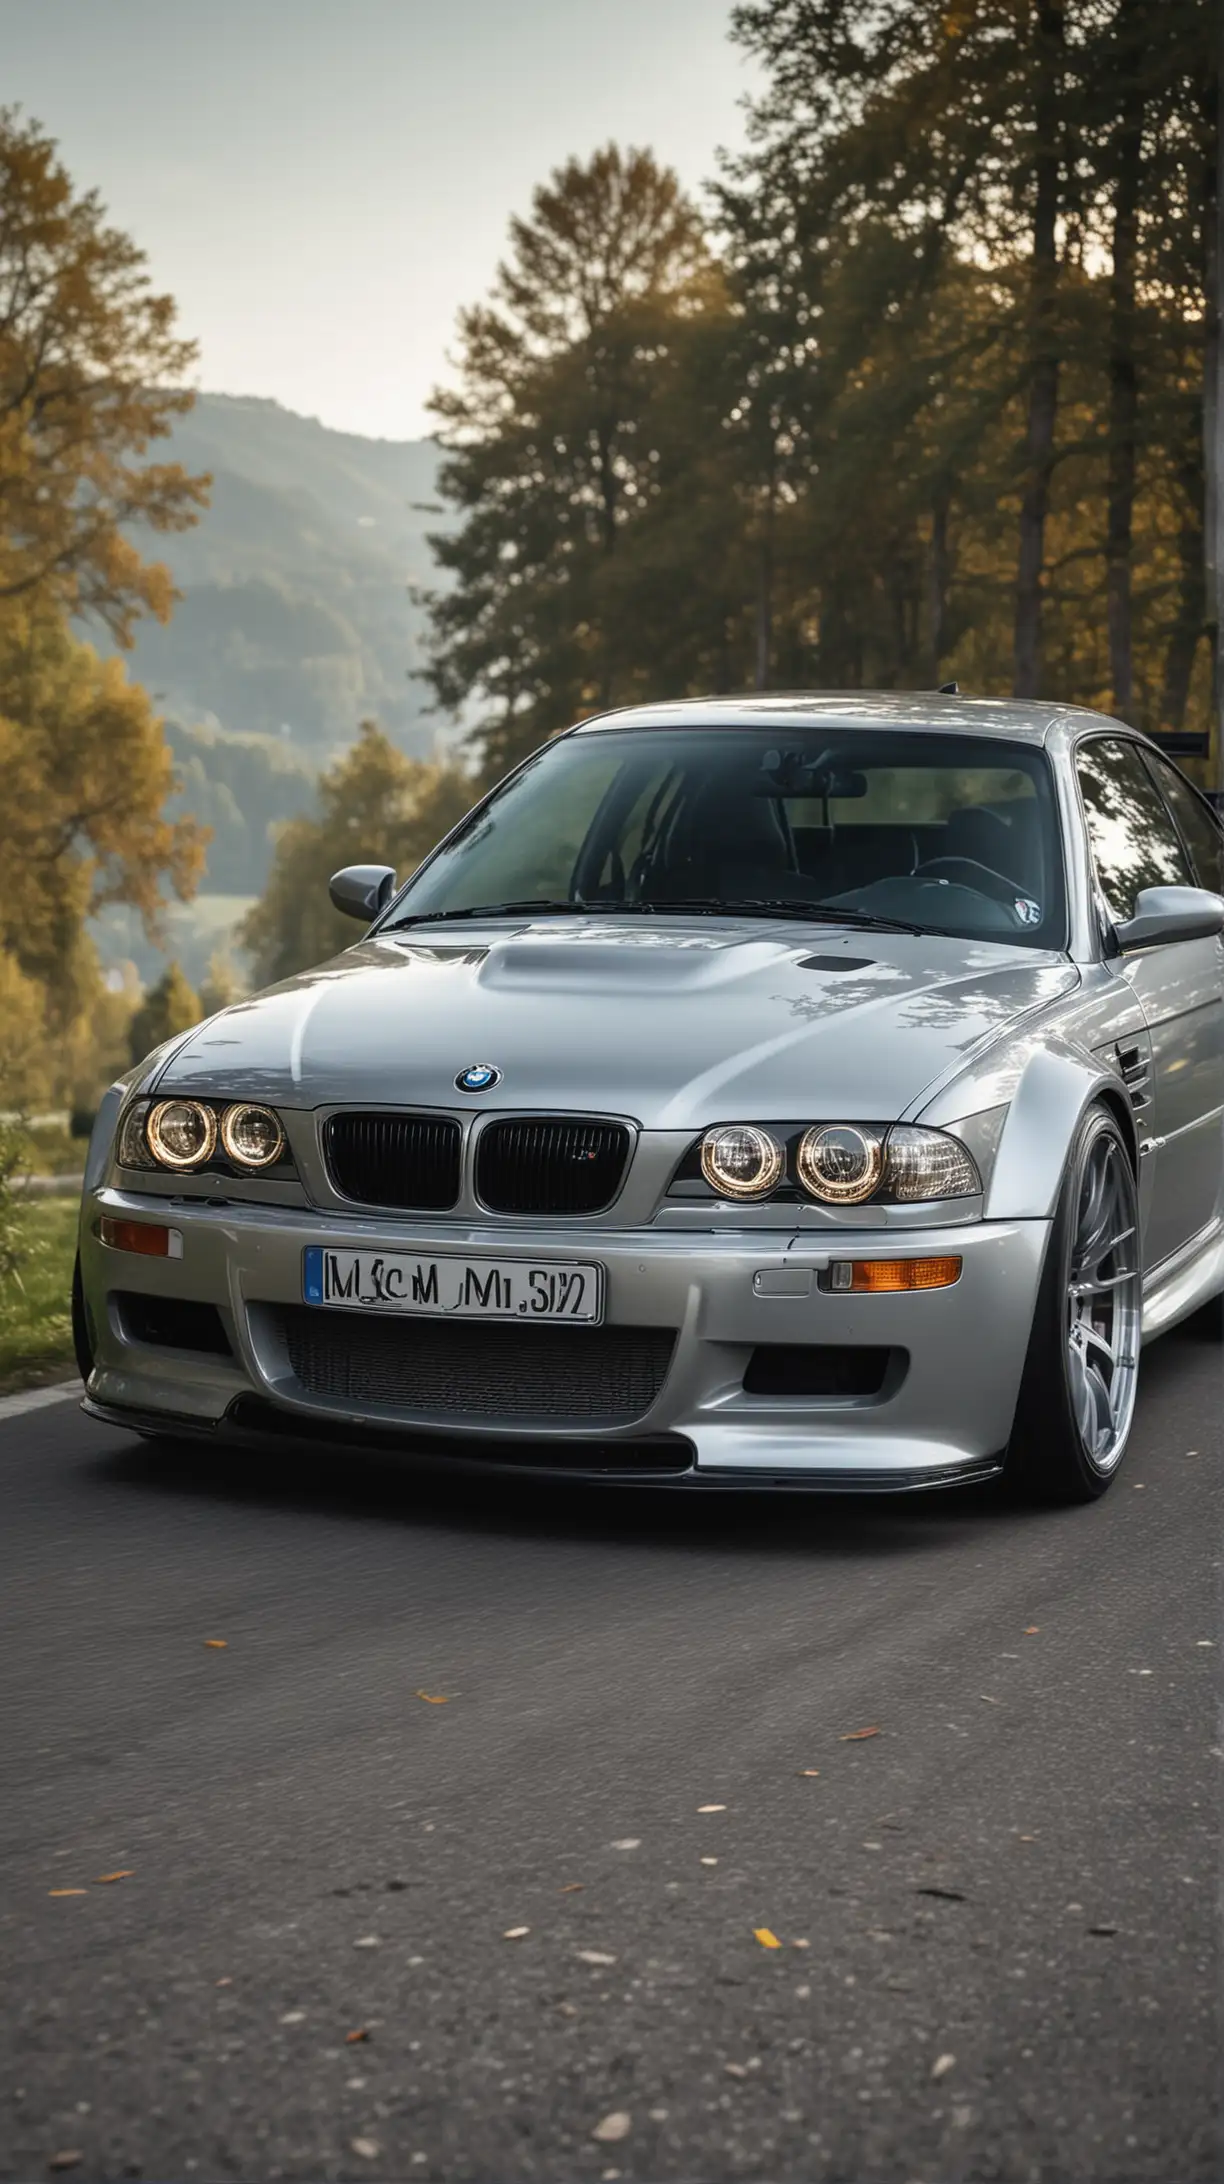 Silver BMW M3 CSL Driving through Scenic Landscape with Headlights On